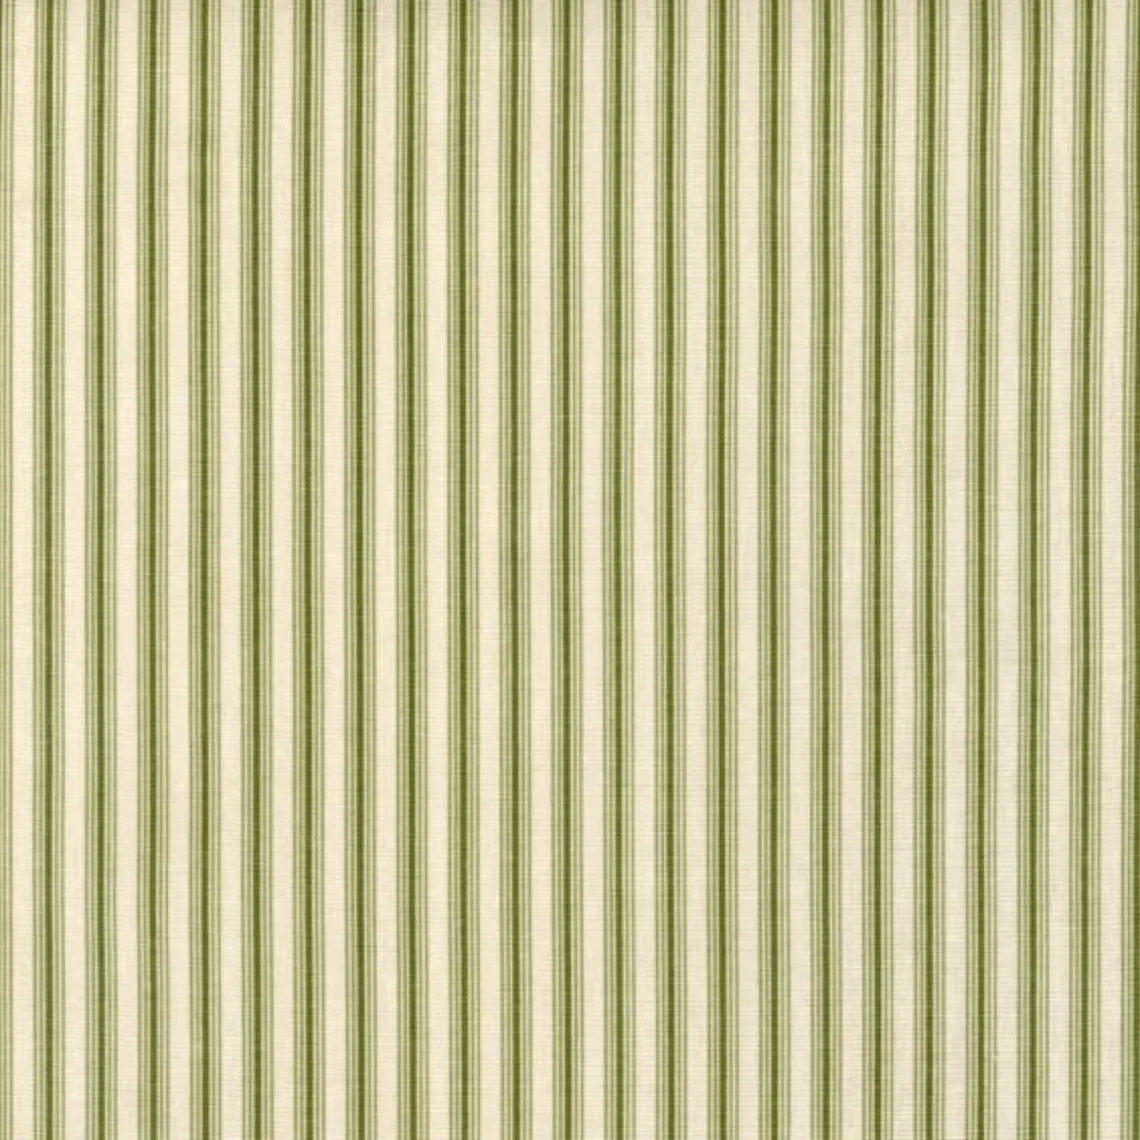 tailored tier cafe curtain panels pair in cottage jungle green stripe